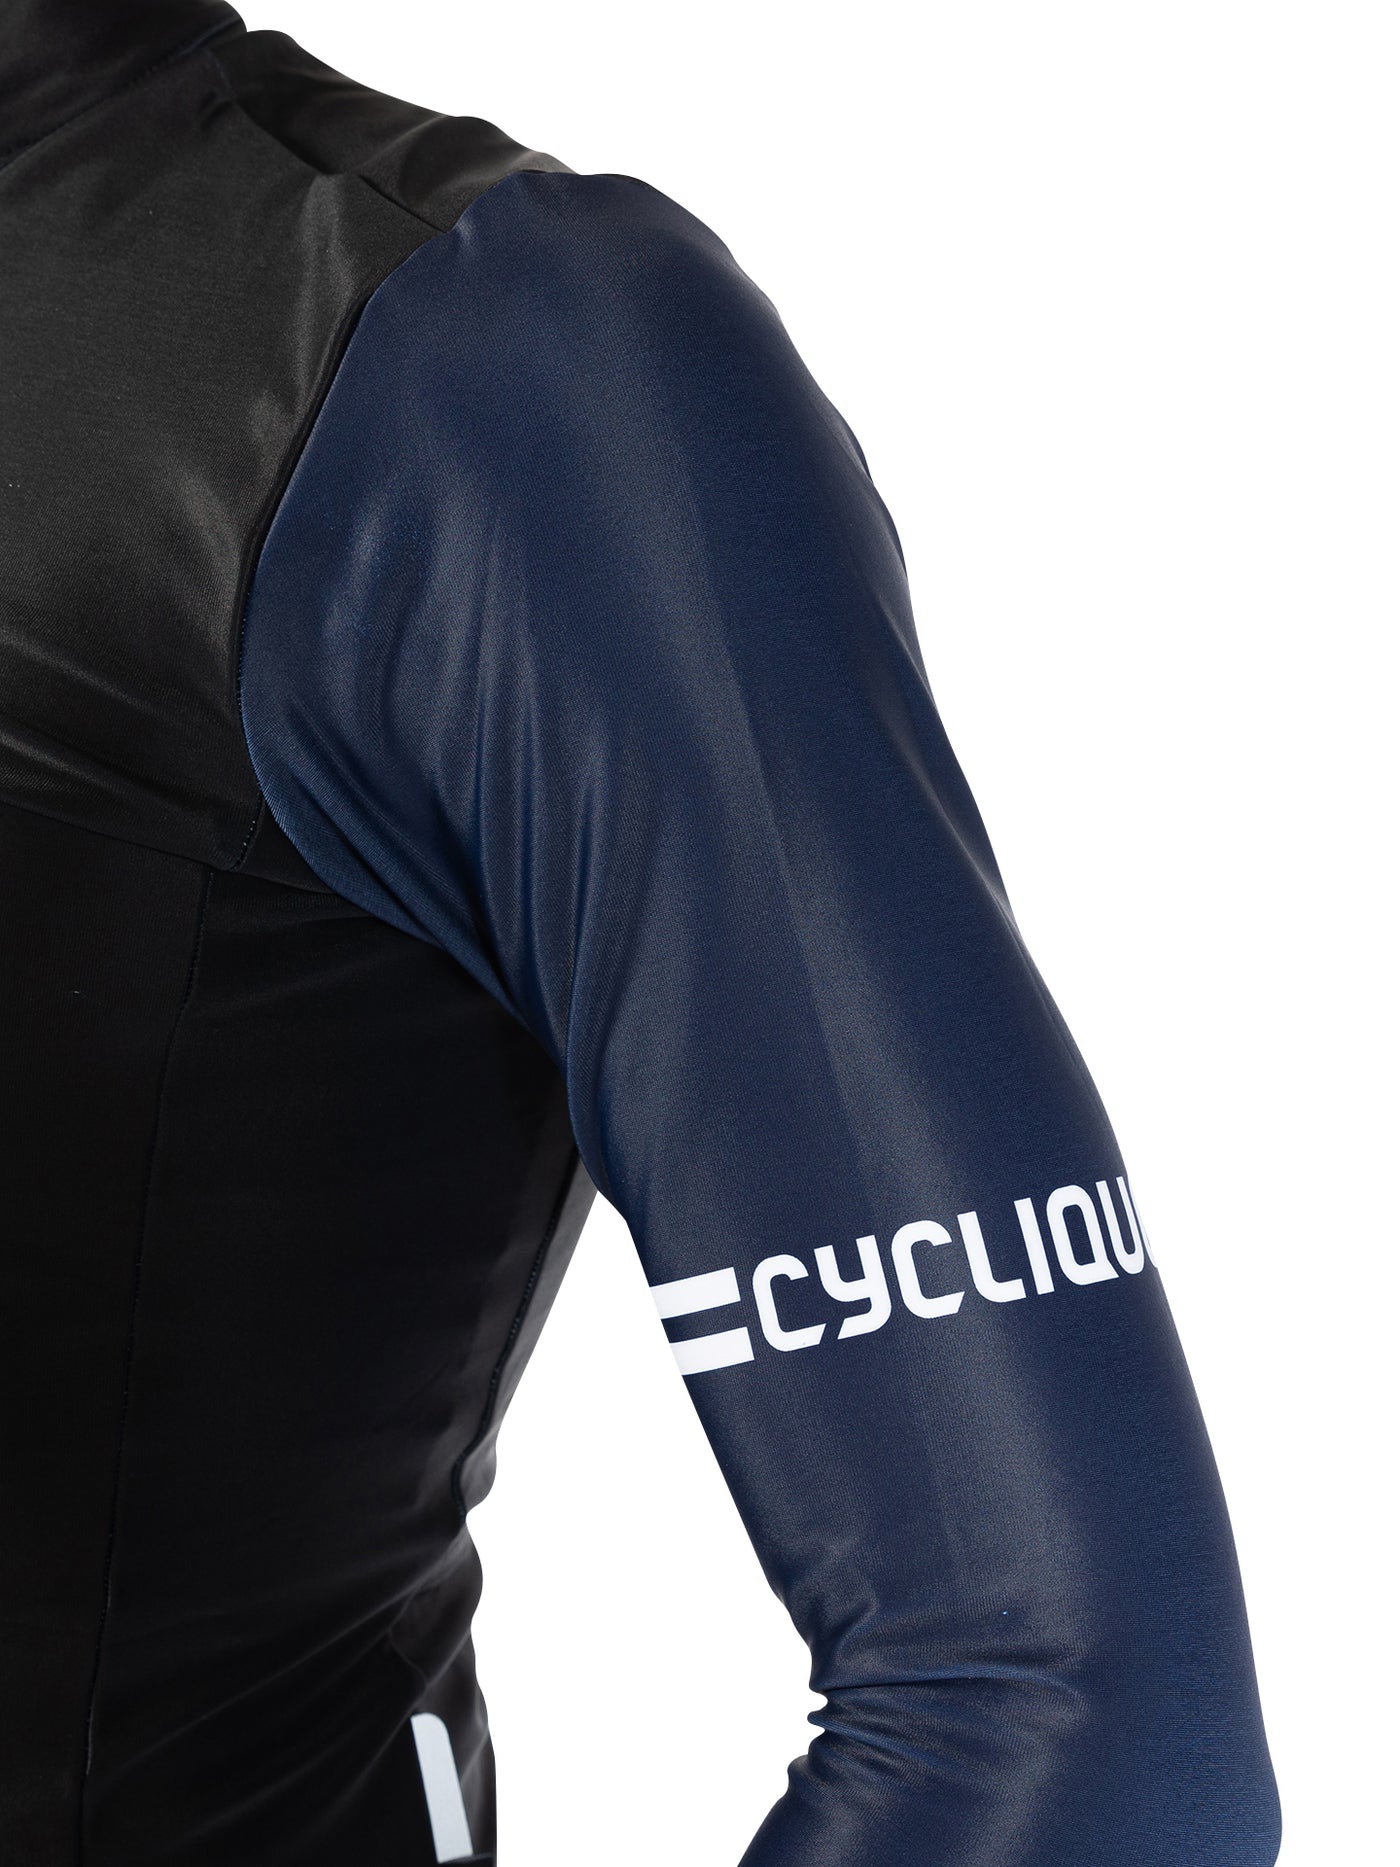 ExcentriQ jersey long sleeves